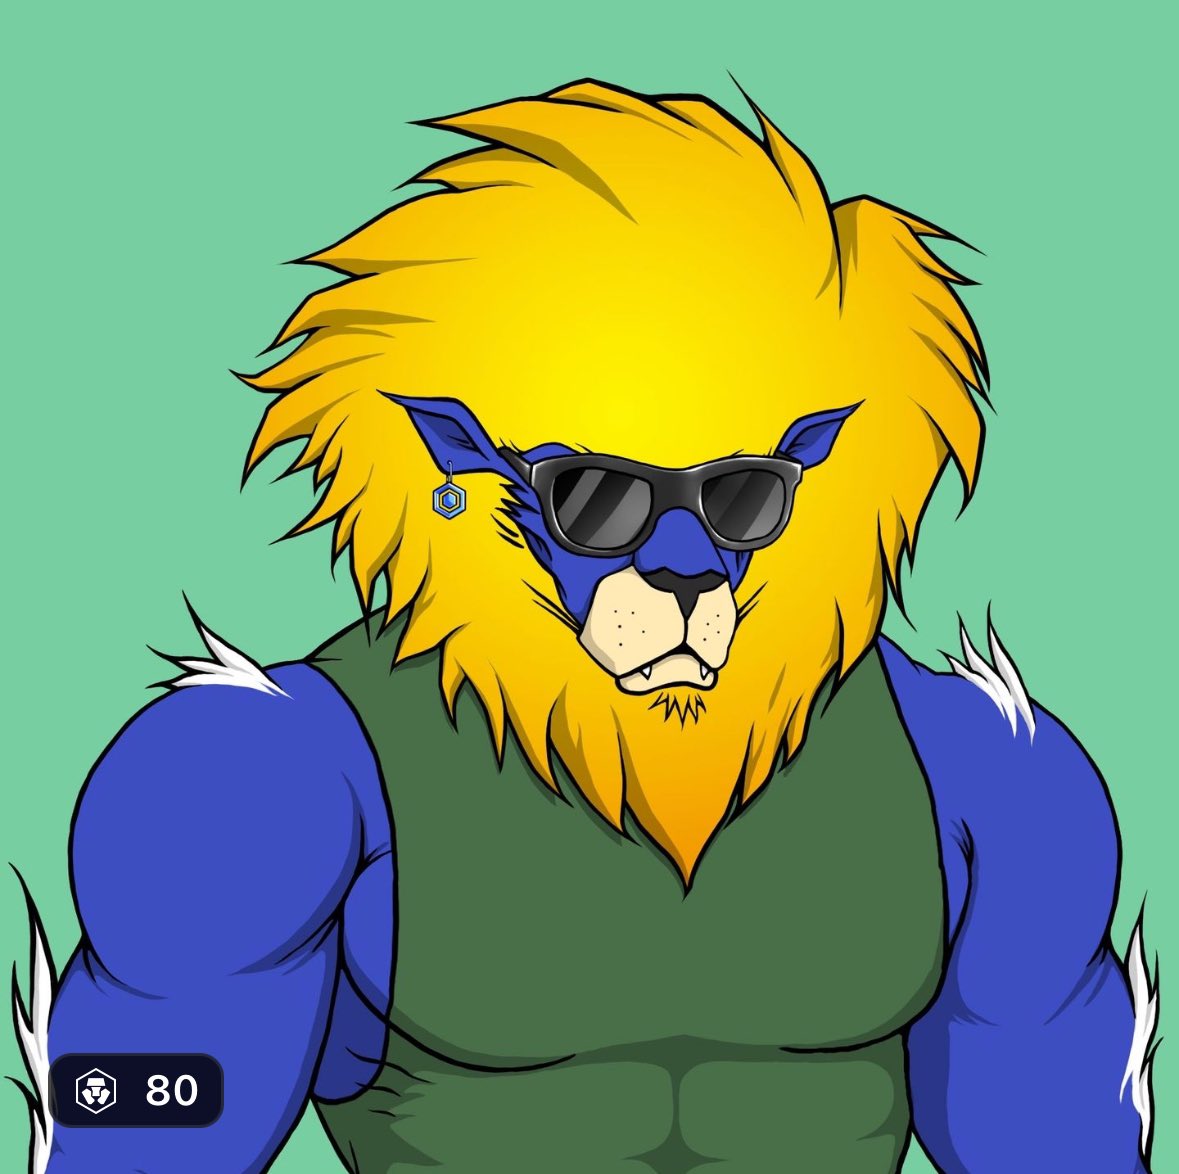 Cryptkeeper picked up a new lion!! @LoadedLions_CDC off @cryptocomnft I think I will just keep this one love being part of the pack!! Let’s Cro!! I still  believe in nfts!  #crofam #nftart #newpfp #cronosearing